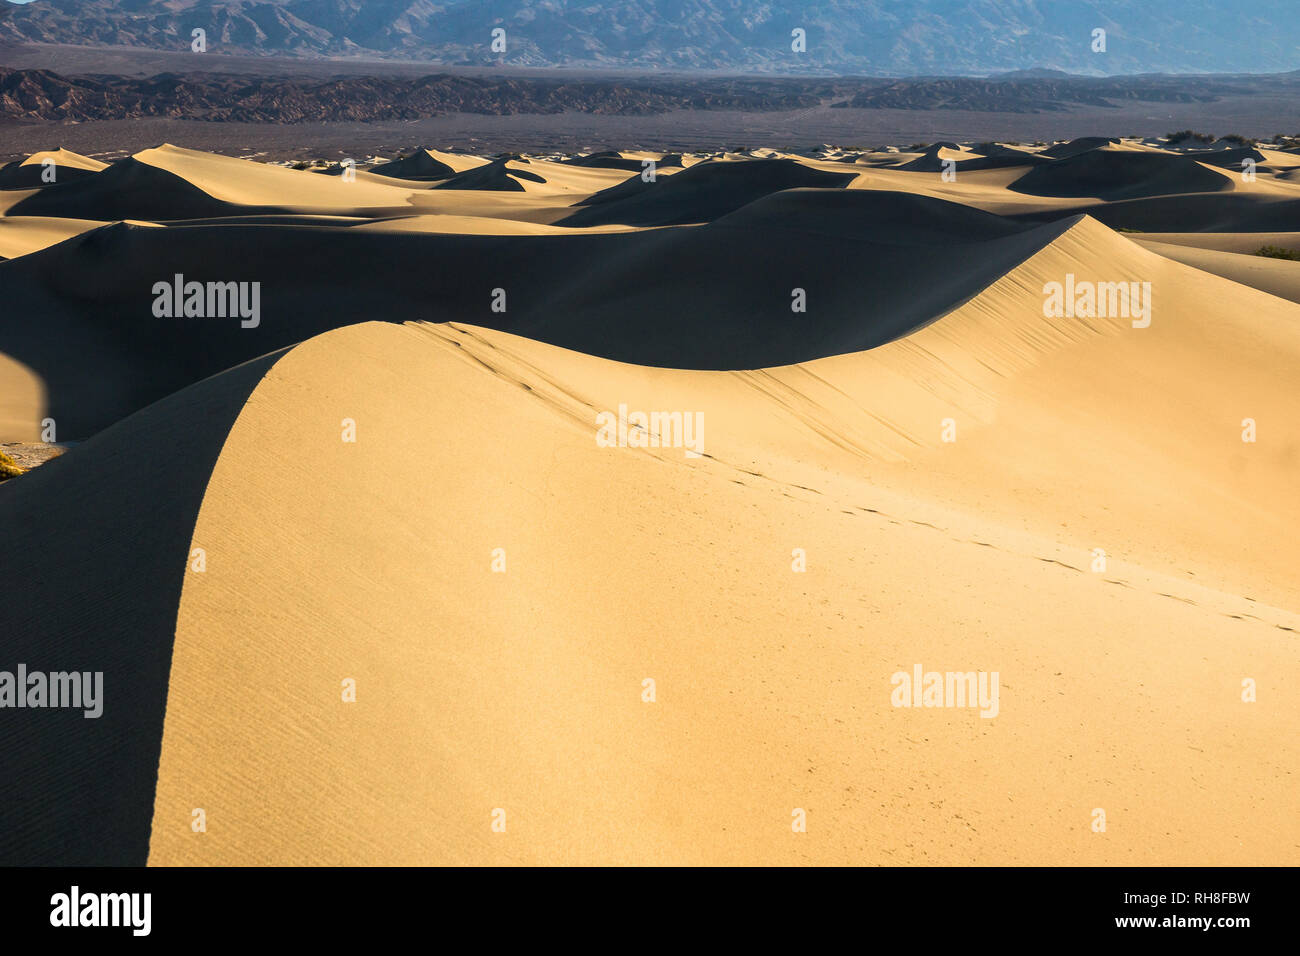 Mesquite Flats Sand Dunes in Death Valley National Park Stock Photo